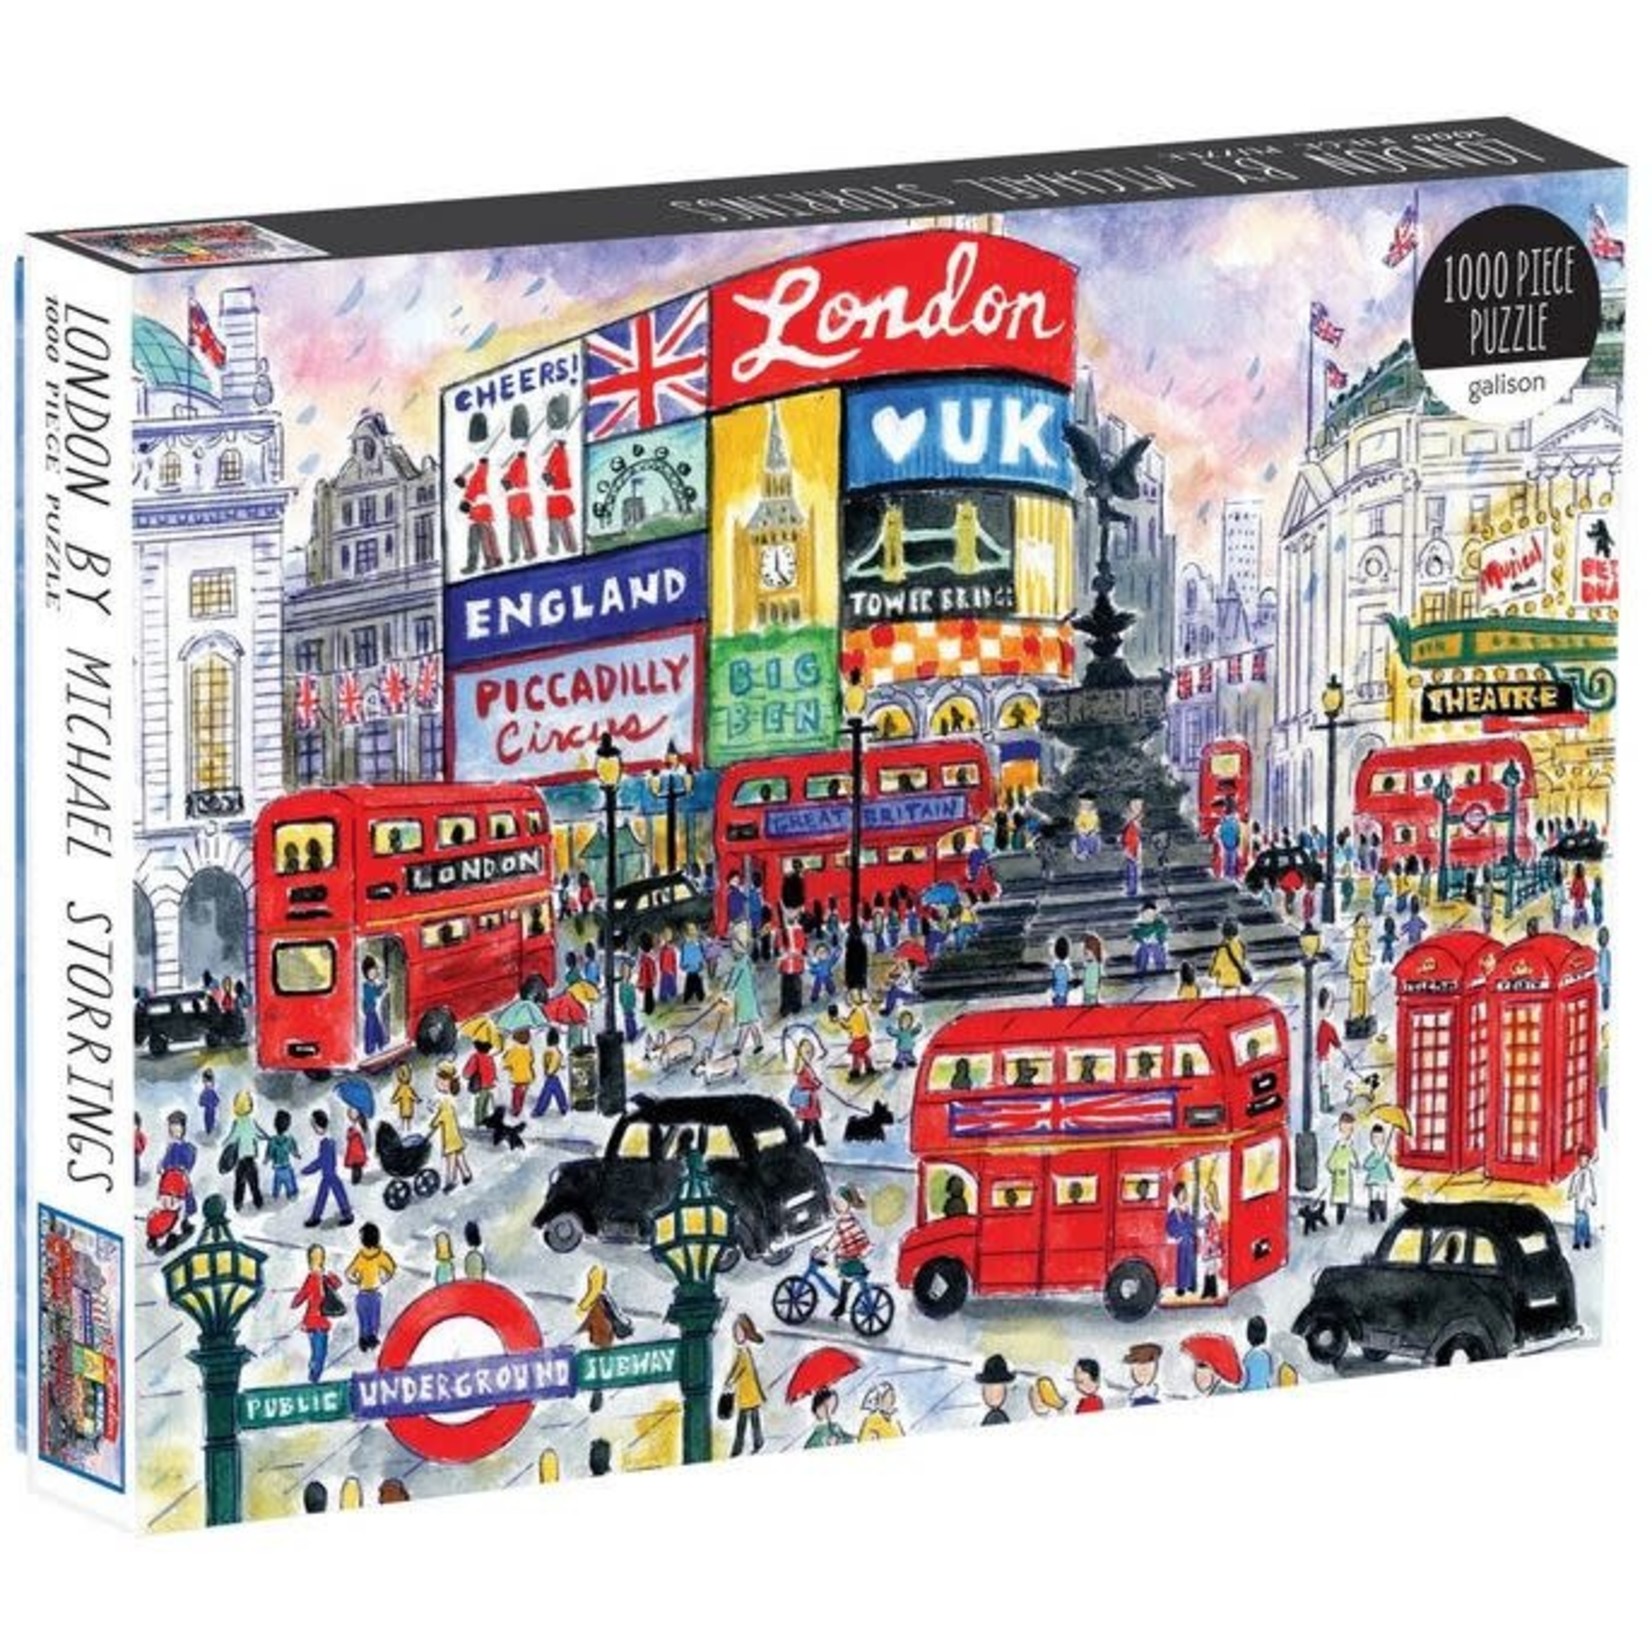 Galison London by Michael Storrings, 1000-Piece Jigsaw Puzzle